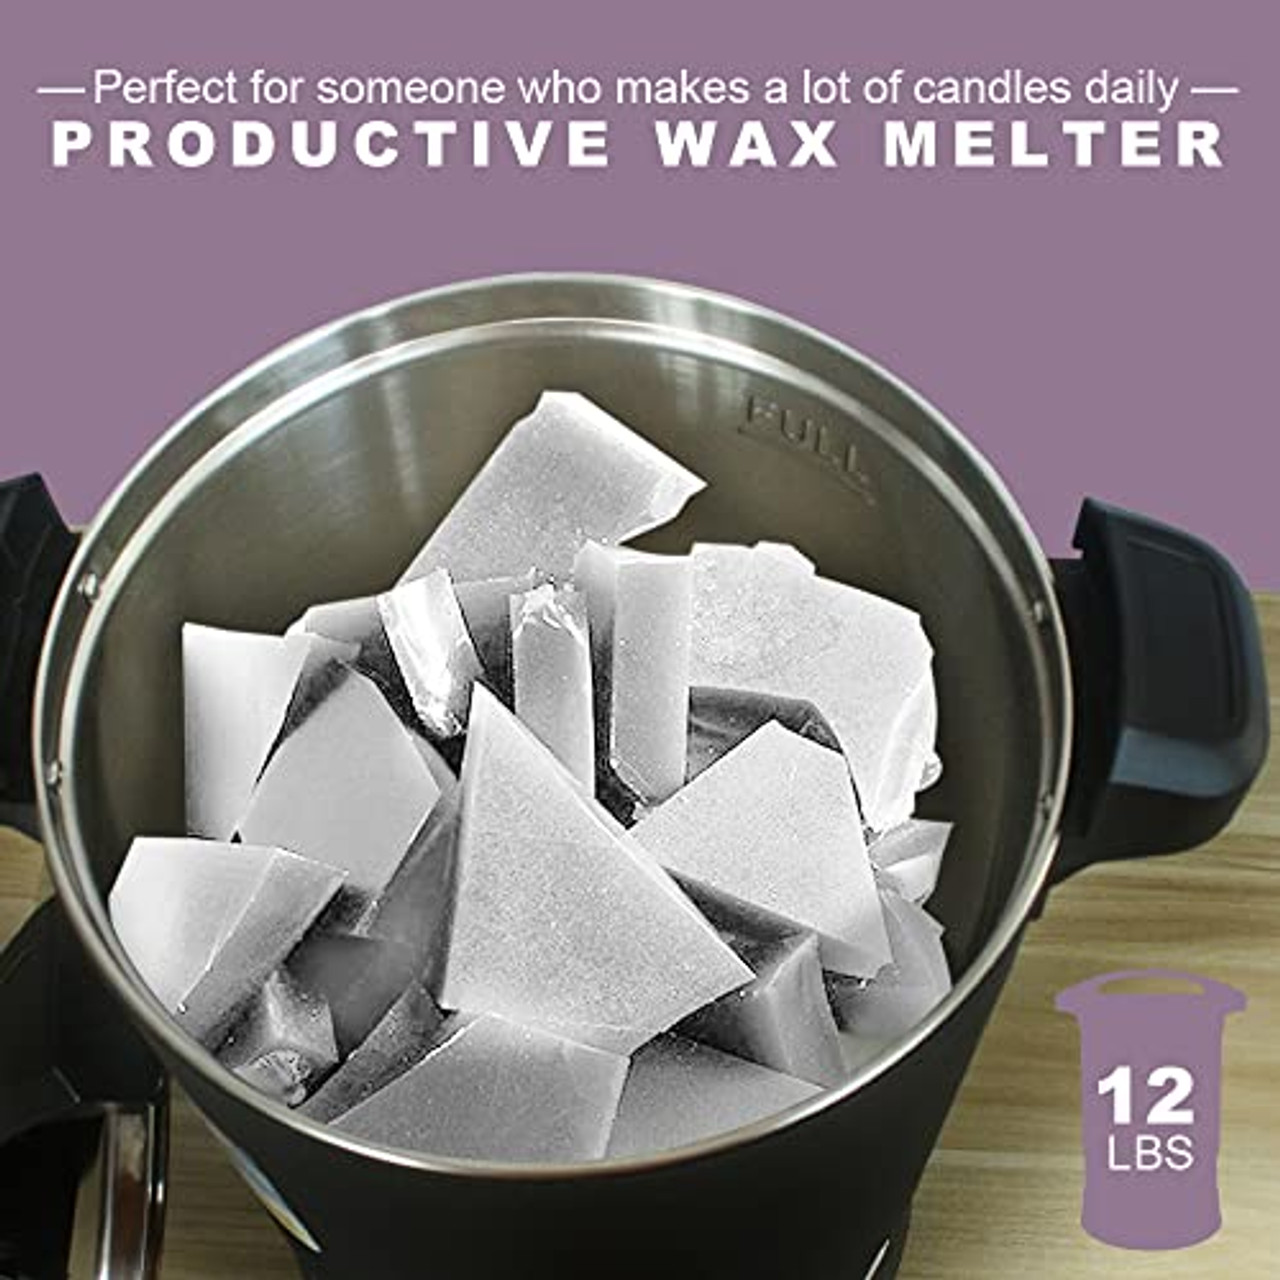 Electric Wax Melter for Candle Making Supplies, Holds 6 Qt of Melted Wax,  Electric Wax Melting Pot for Soy Wax with Quick-Pour Valve